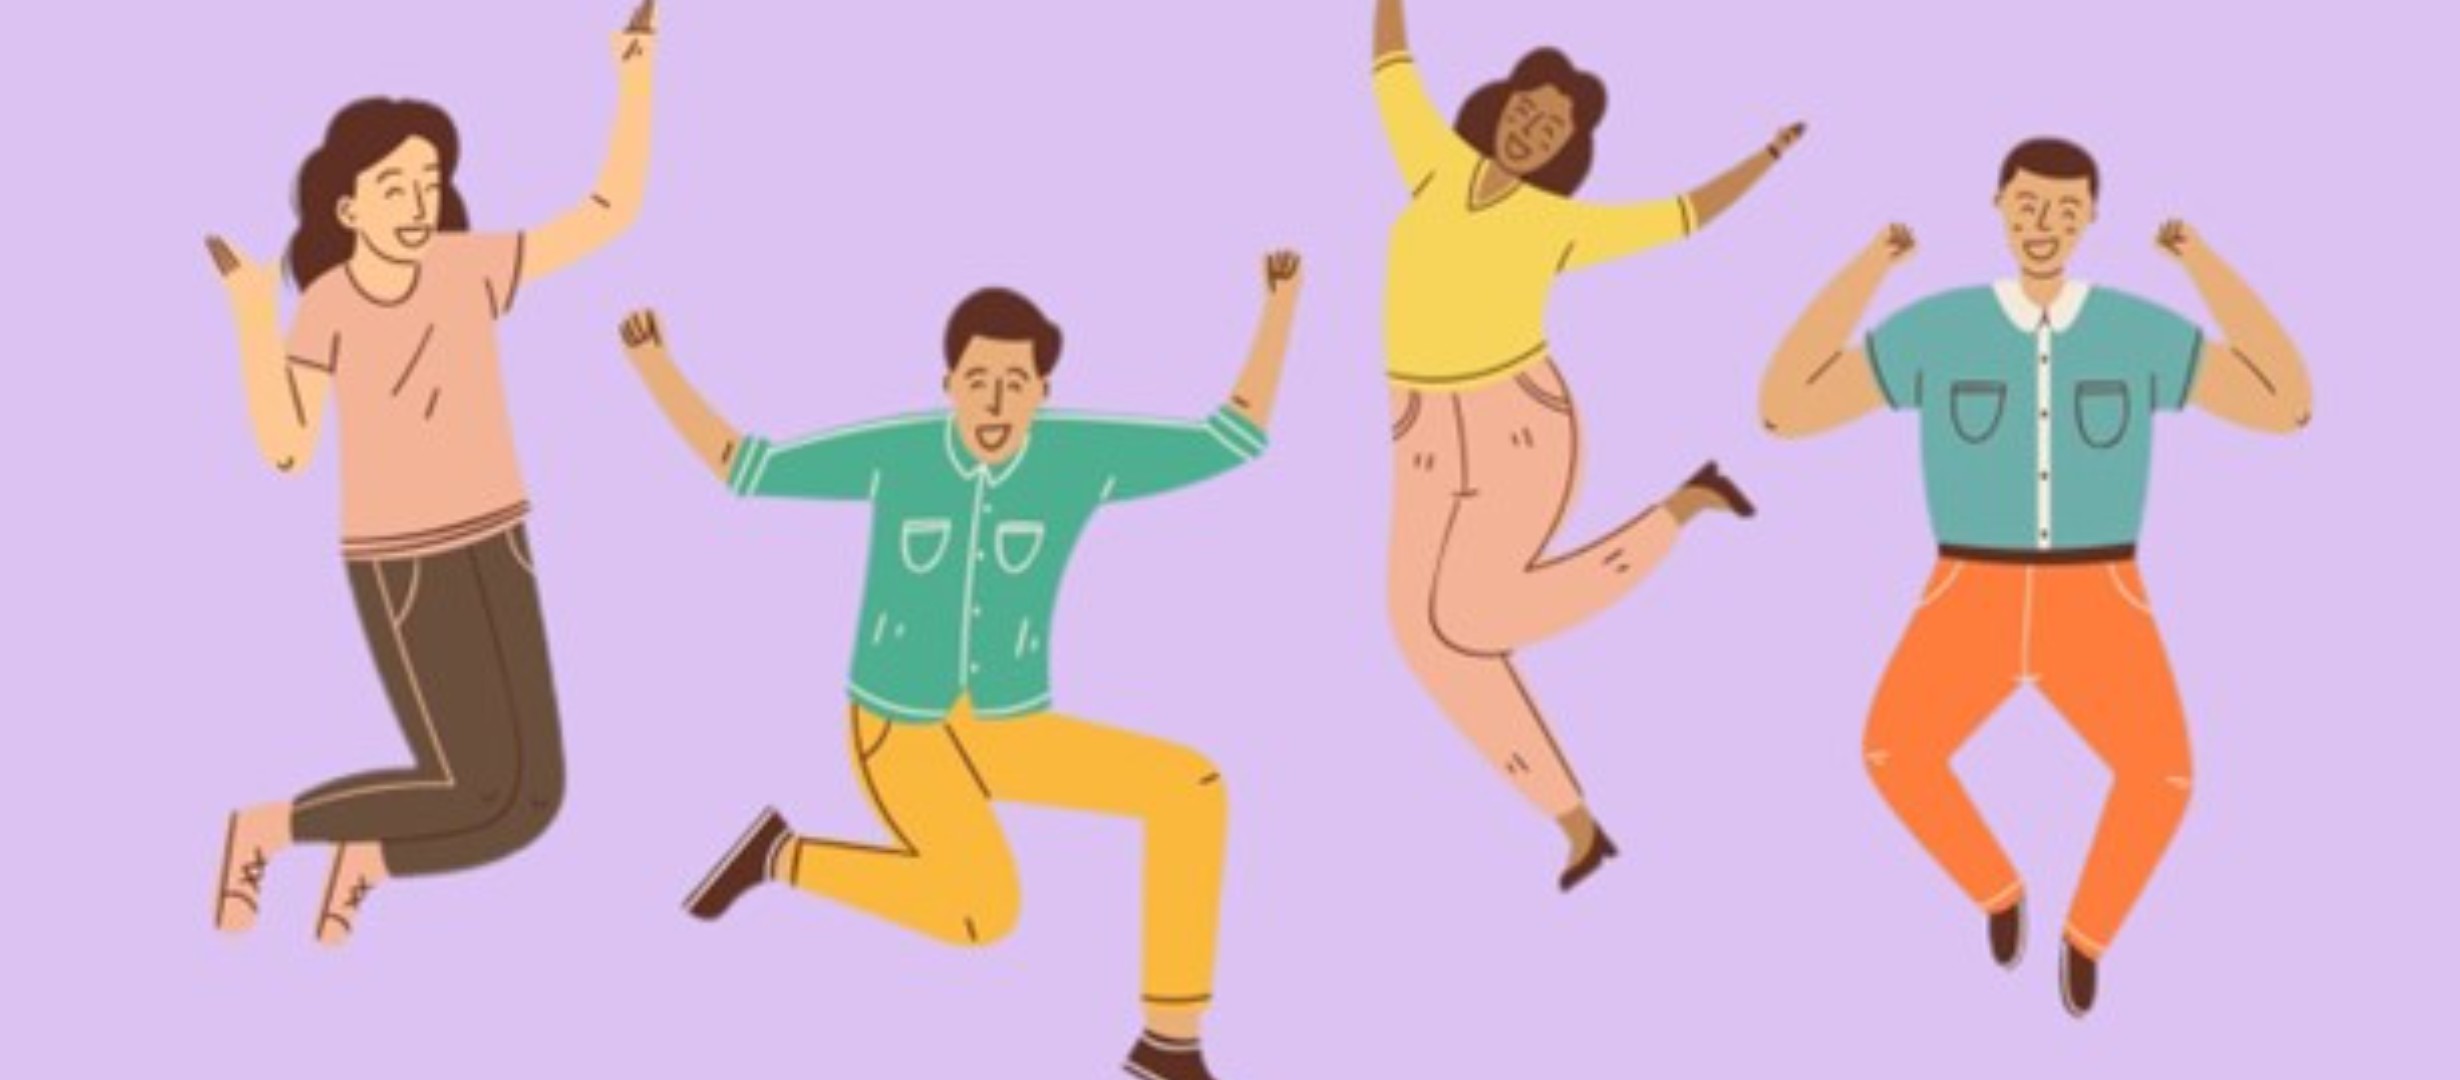 Four young people jumping up and down with happy, joyful expressions